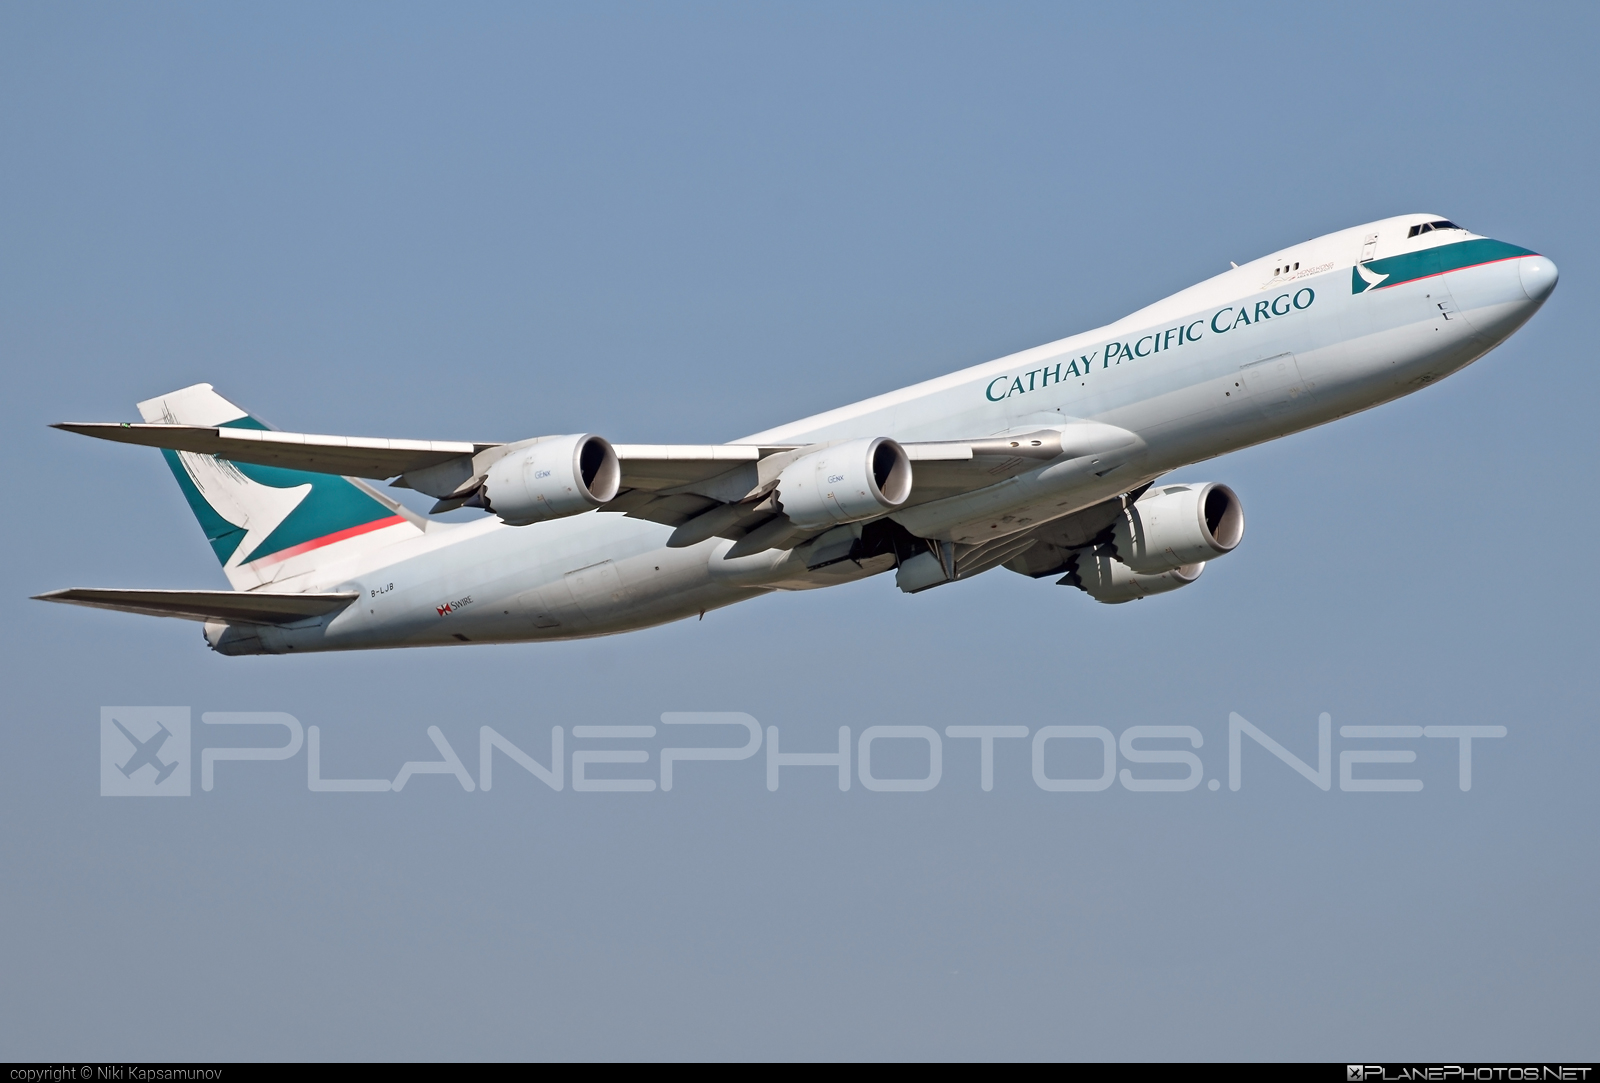 Boeing 747-8F - B-LJB operated by Cathay Pacific Cargo #b747 #b747f #b747freighter #boeing #boeing747 #cathaypacific #cathaypacificcargo #jumbo